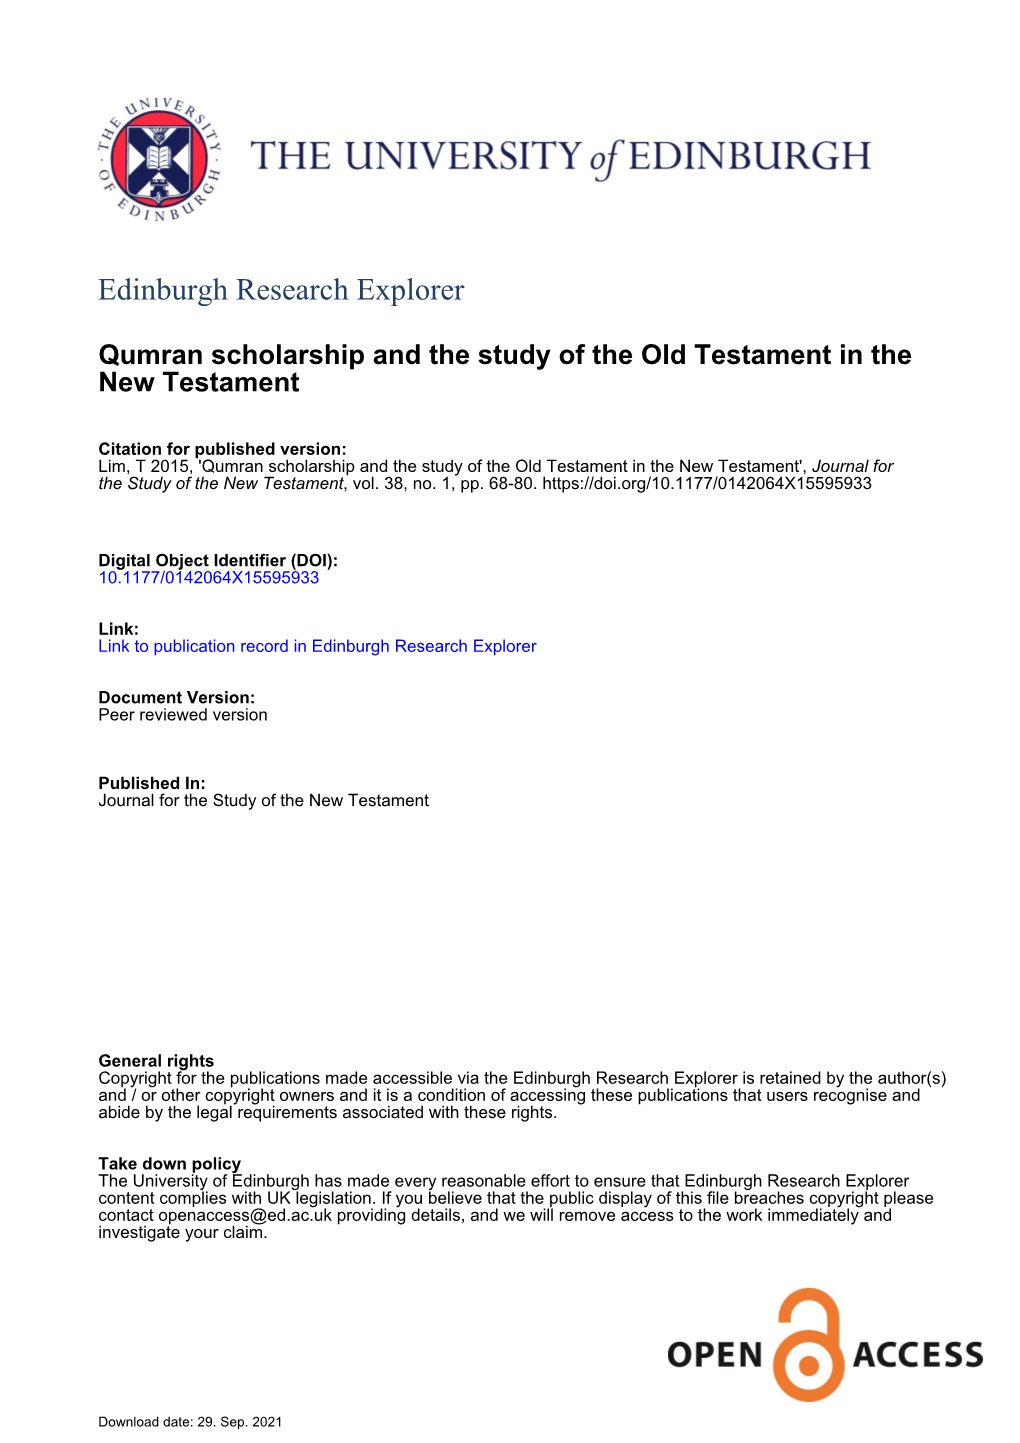 Qumran Scholarship and the Study of the Old Testament in The